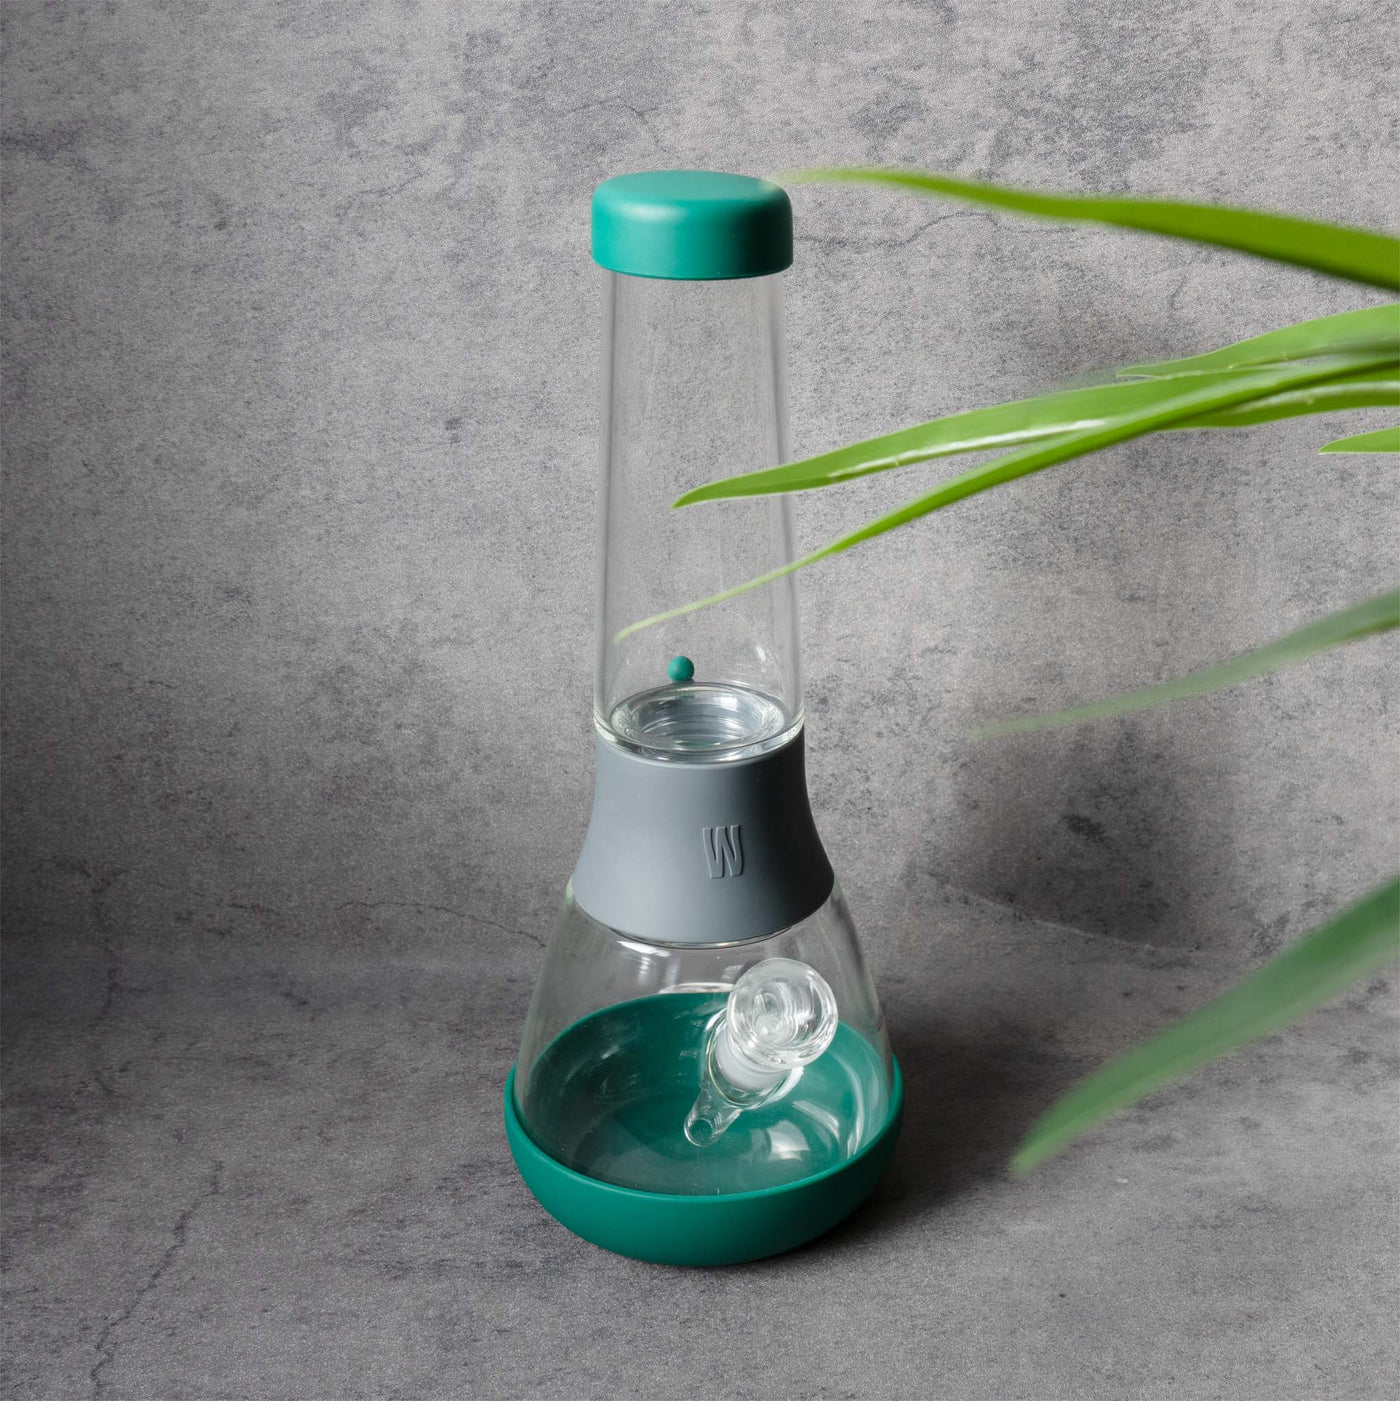 Front view of Weeday glass bong: green base & cap, gray connector, on a textured backdrop with foreground leaves.